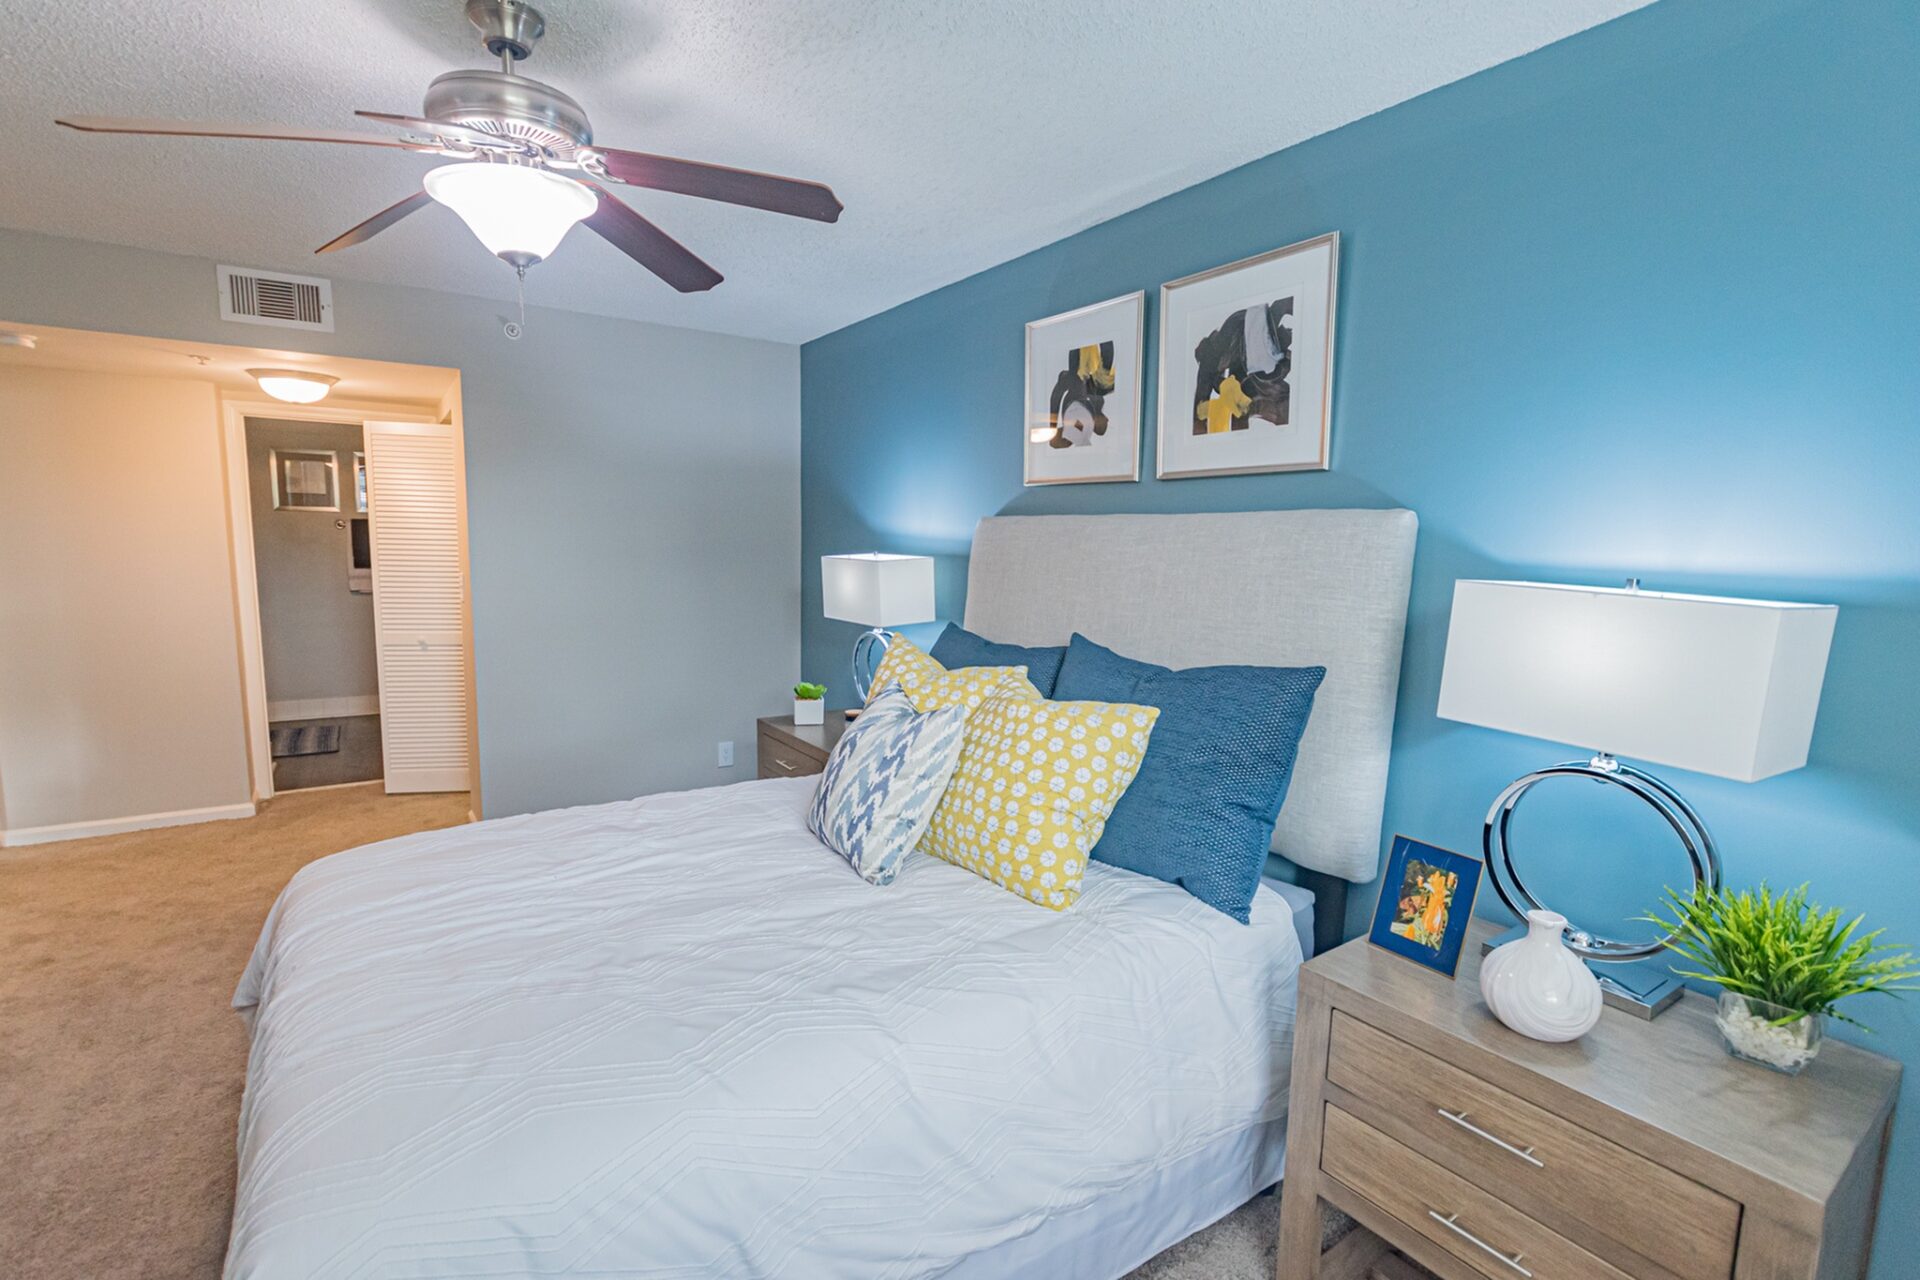 Carpeted bedroom with a ceiling fan that is connected to a bathroom.